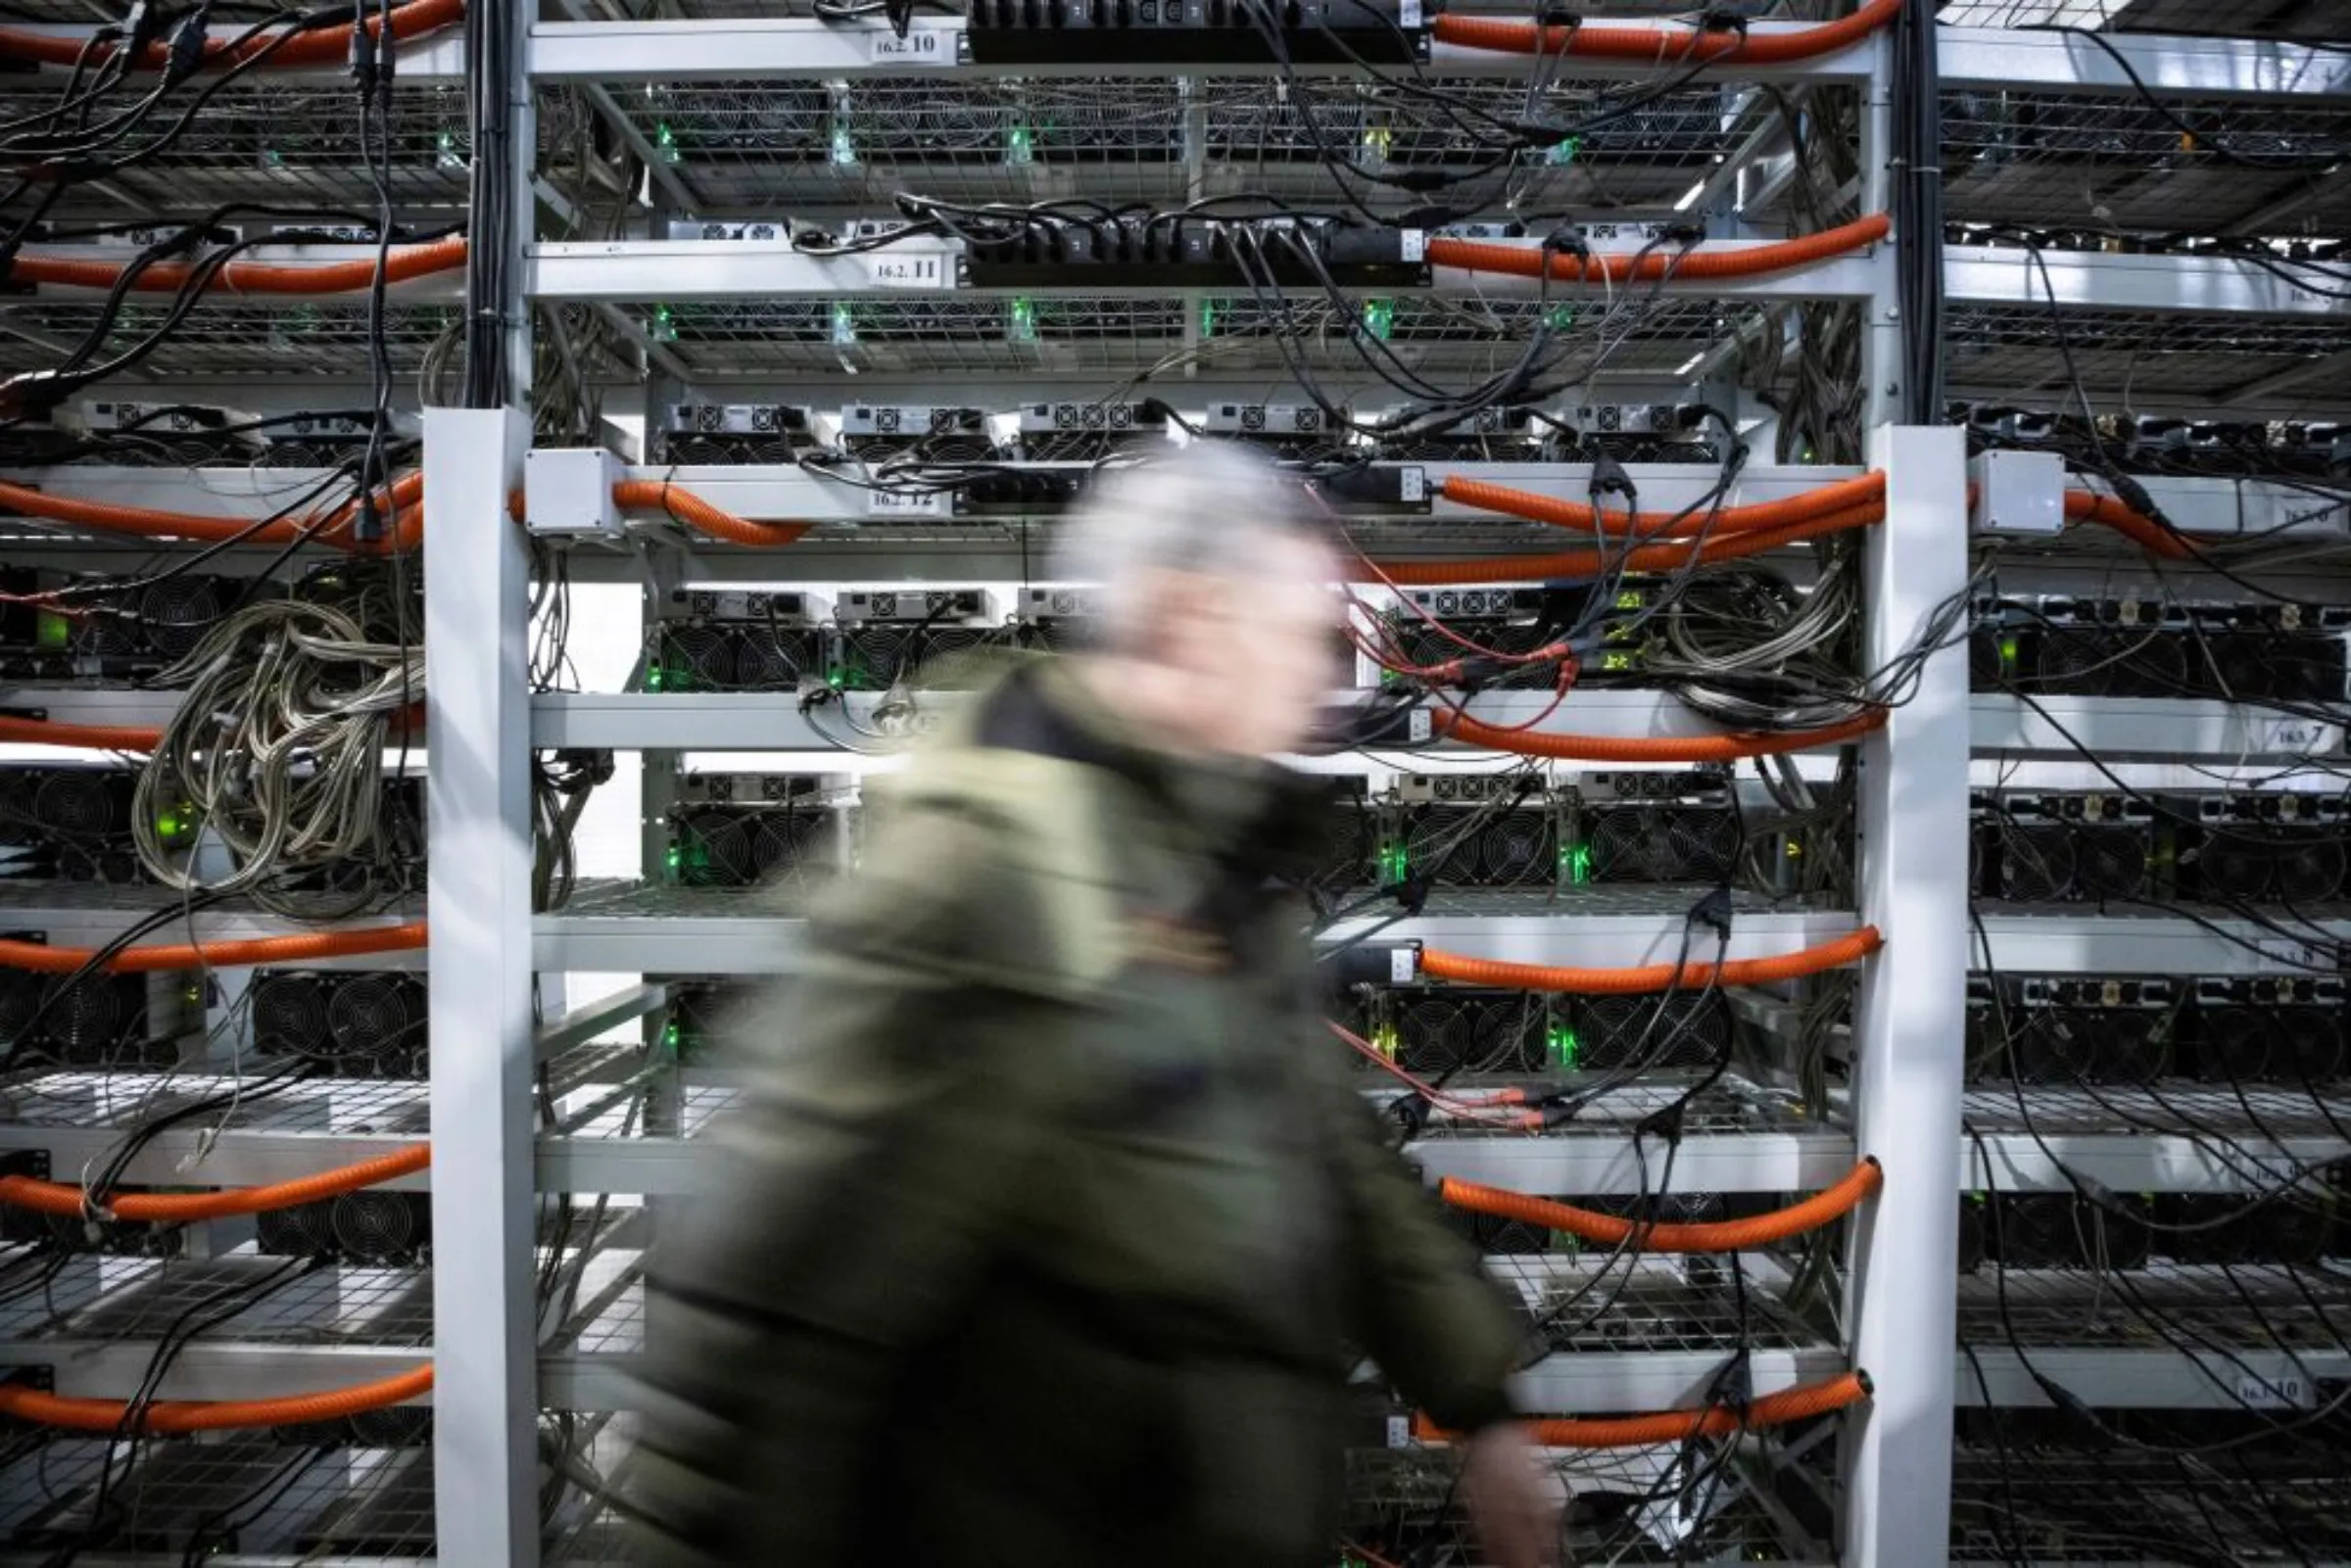 A view shows equipment at the data centre of BitRiver company providing services for cryptocurrency mining in the city of Bratsk in Irkutsk Region, Russia March 2, 2021